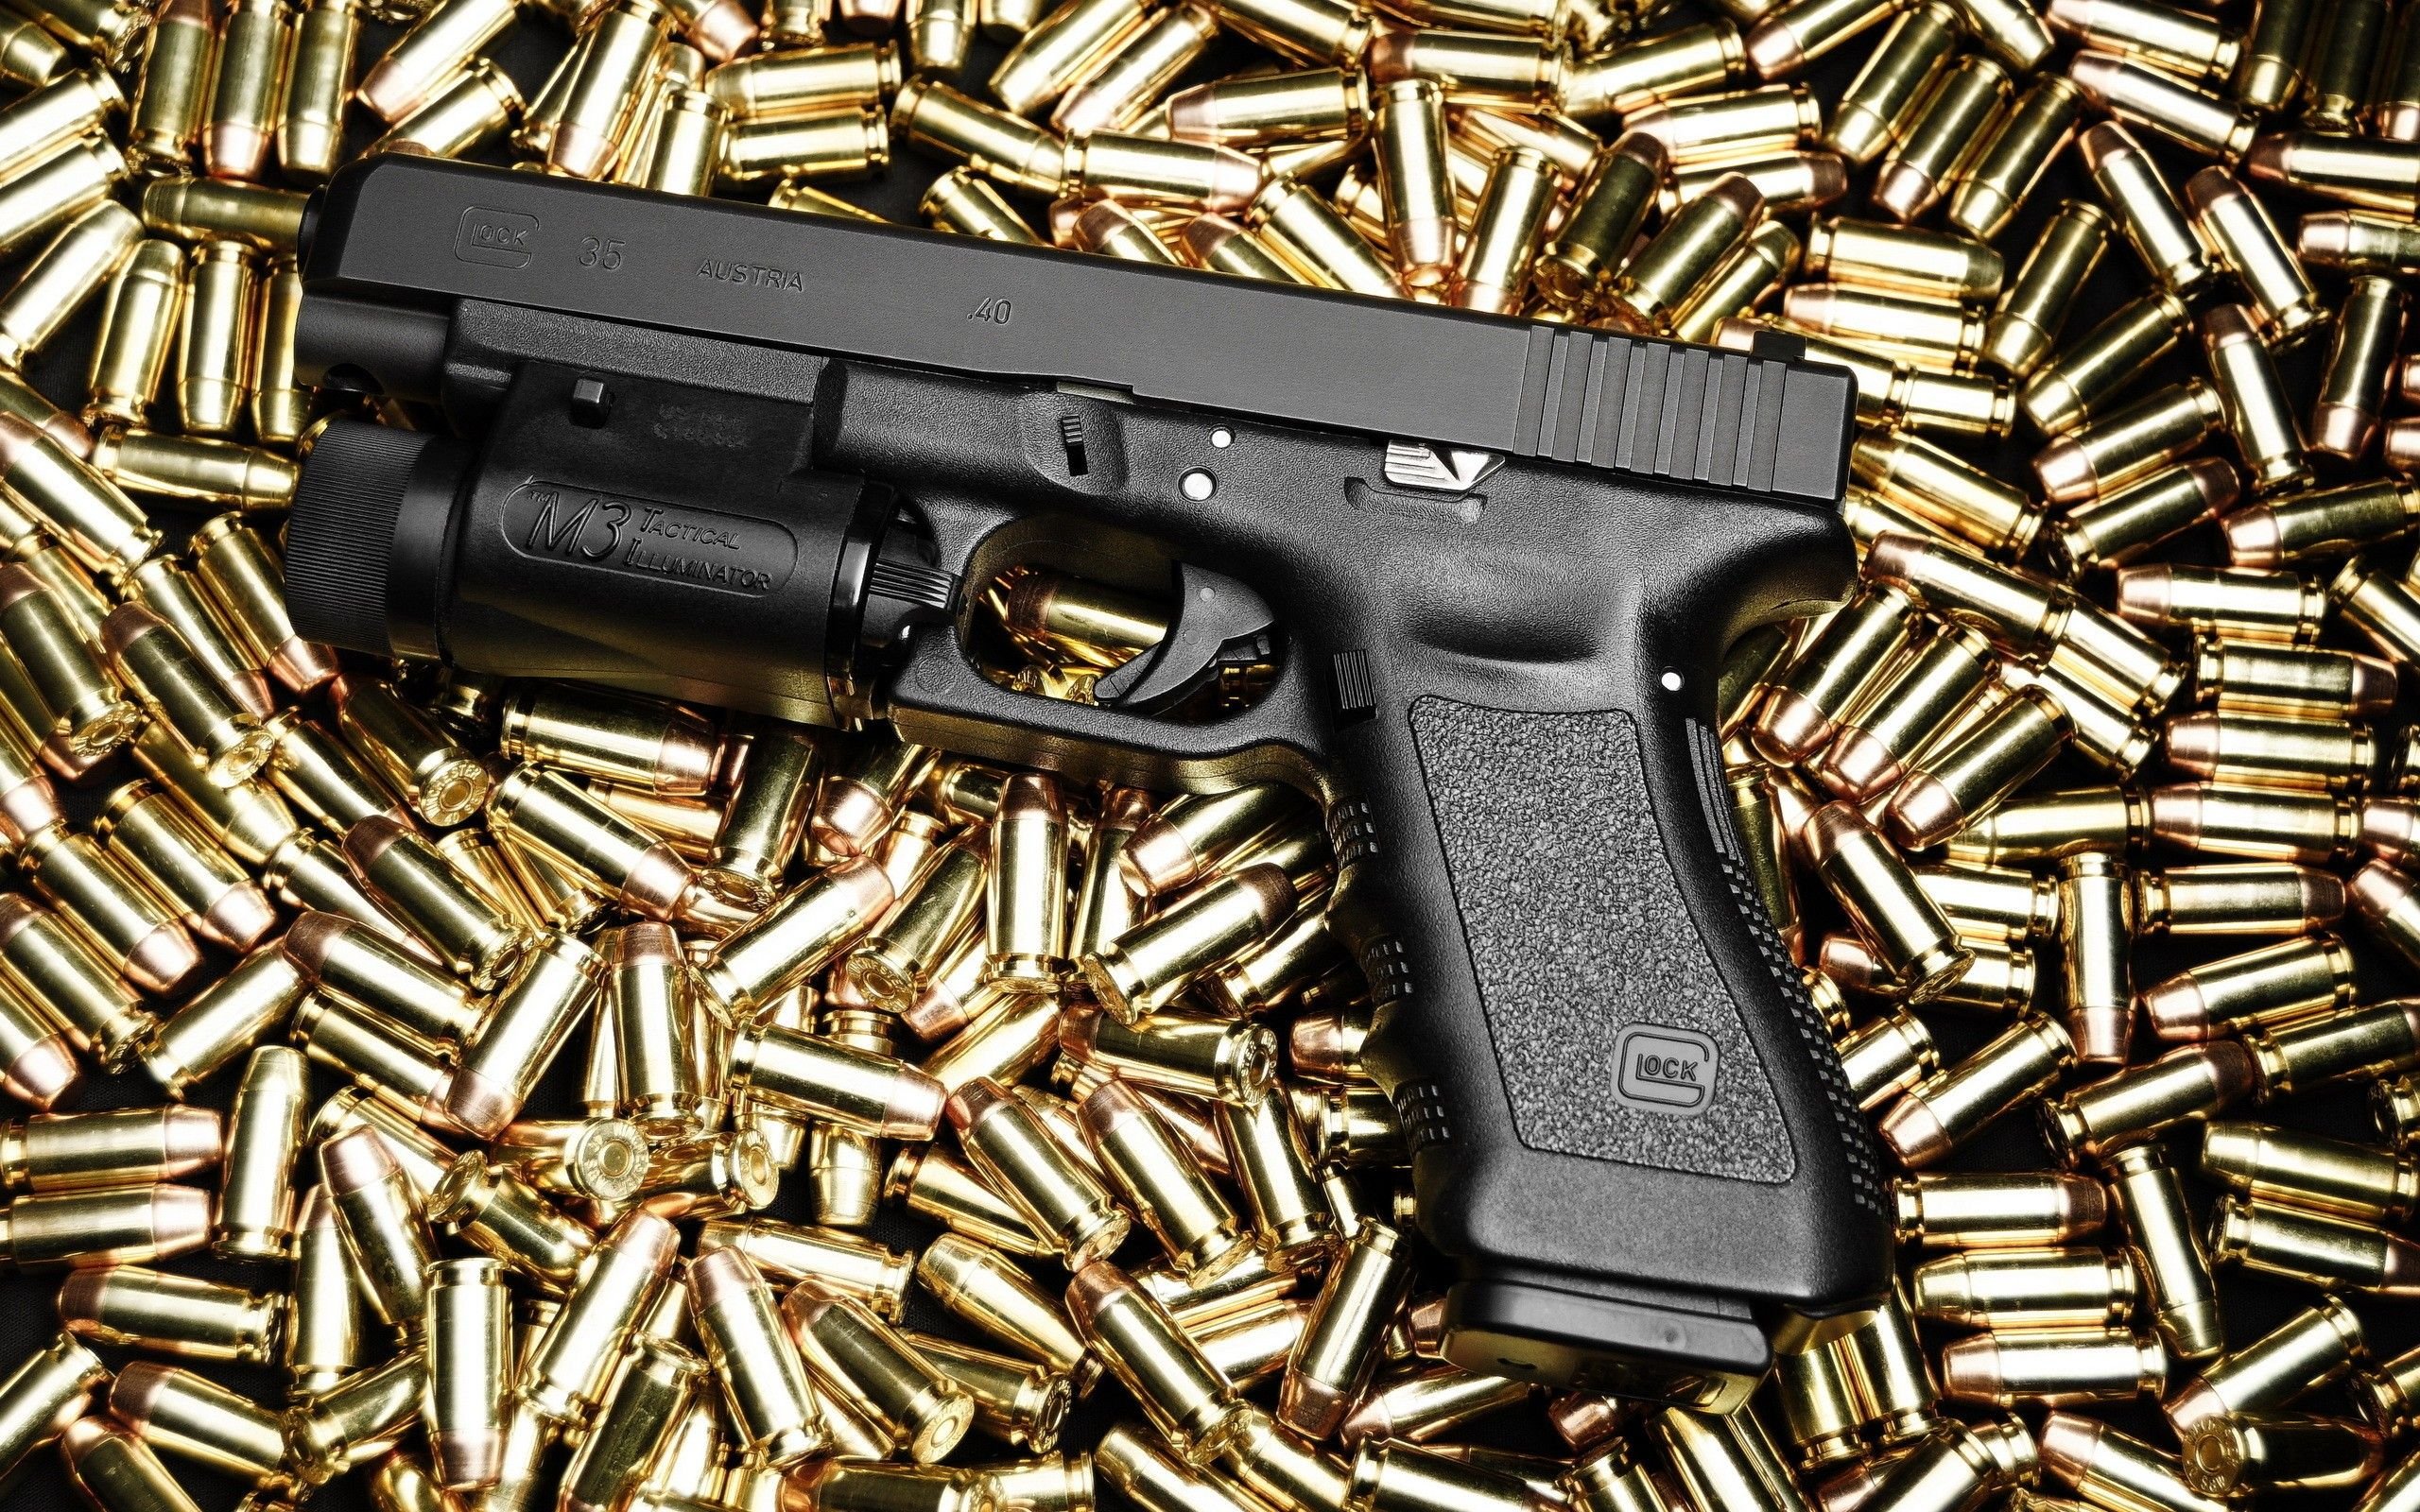 Glock wallpapers ·① Download free amazing full HD backgrounds for